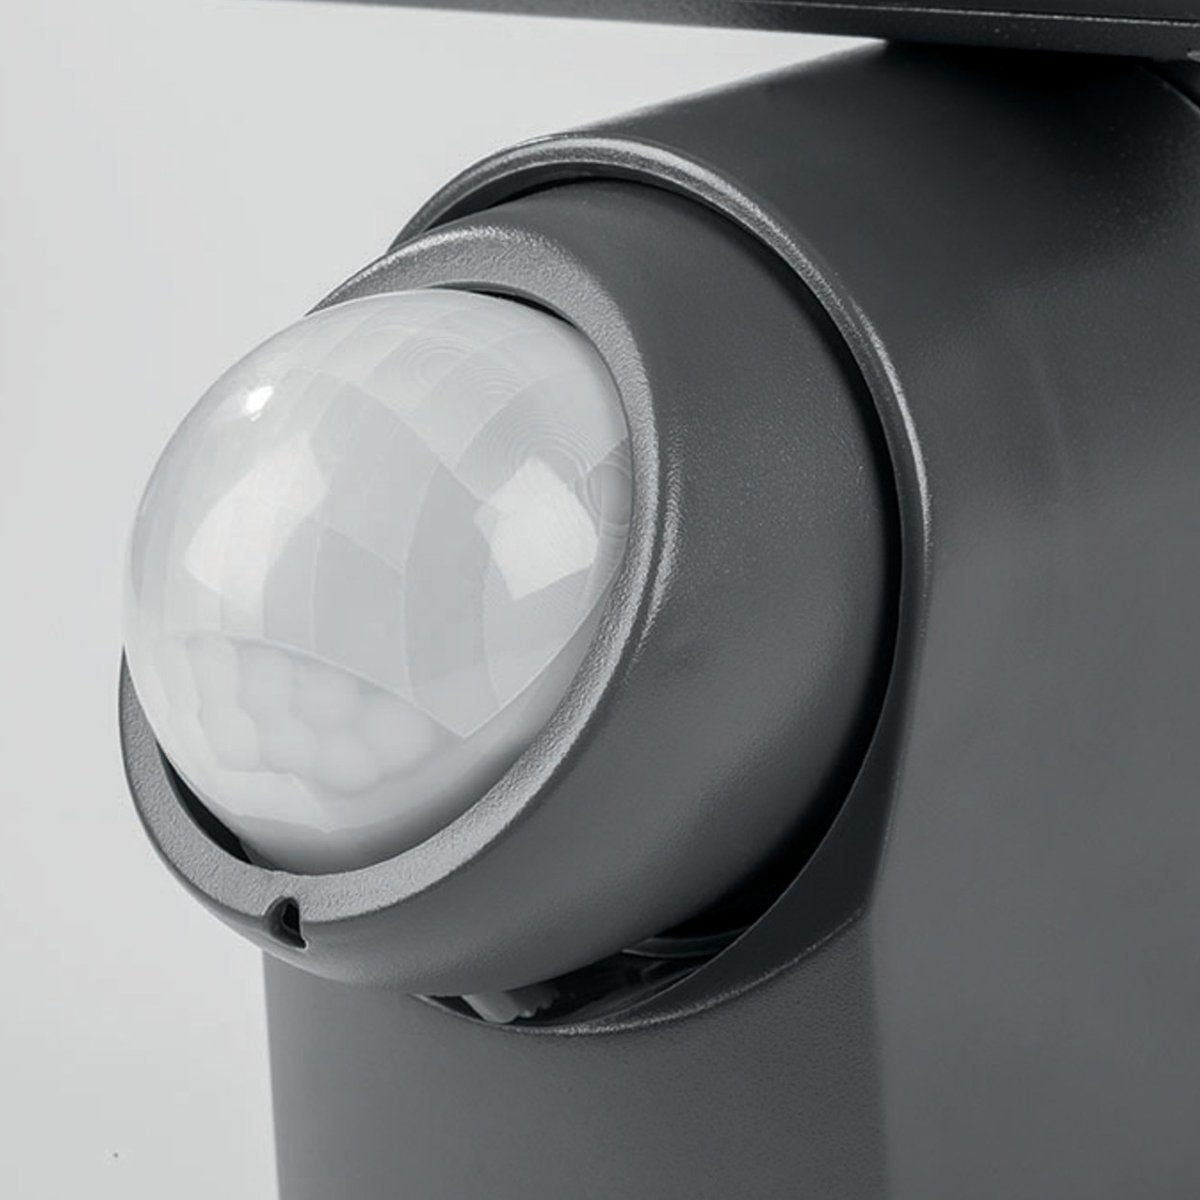 Atlas has been designed for use outdoors. It features IP code IP54, which means that the light is protected from dirt and moisture. This LED floodlight is simple and modern in design to create a minimalist light. The LEDs are housed behind a prismatic diffuser the body of the light is made from aluminium making it suitable for outdoors. The built in integrated motion sensor offers flexibility and energy efficiency and is linked to a high-definition camera which can be controlled using a free app. 